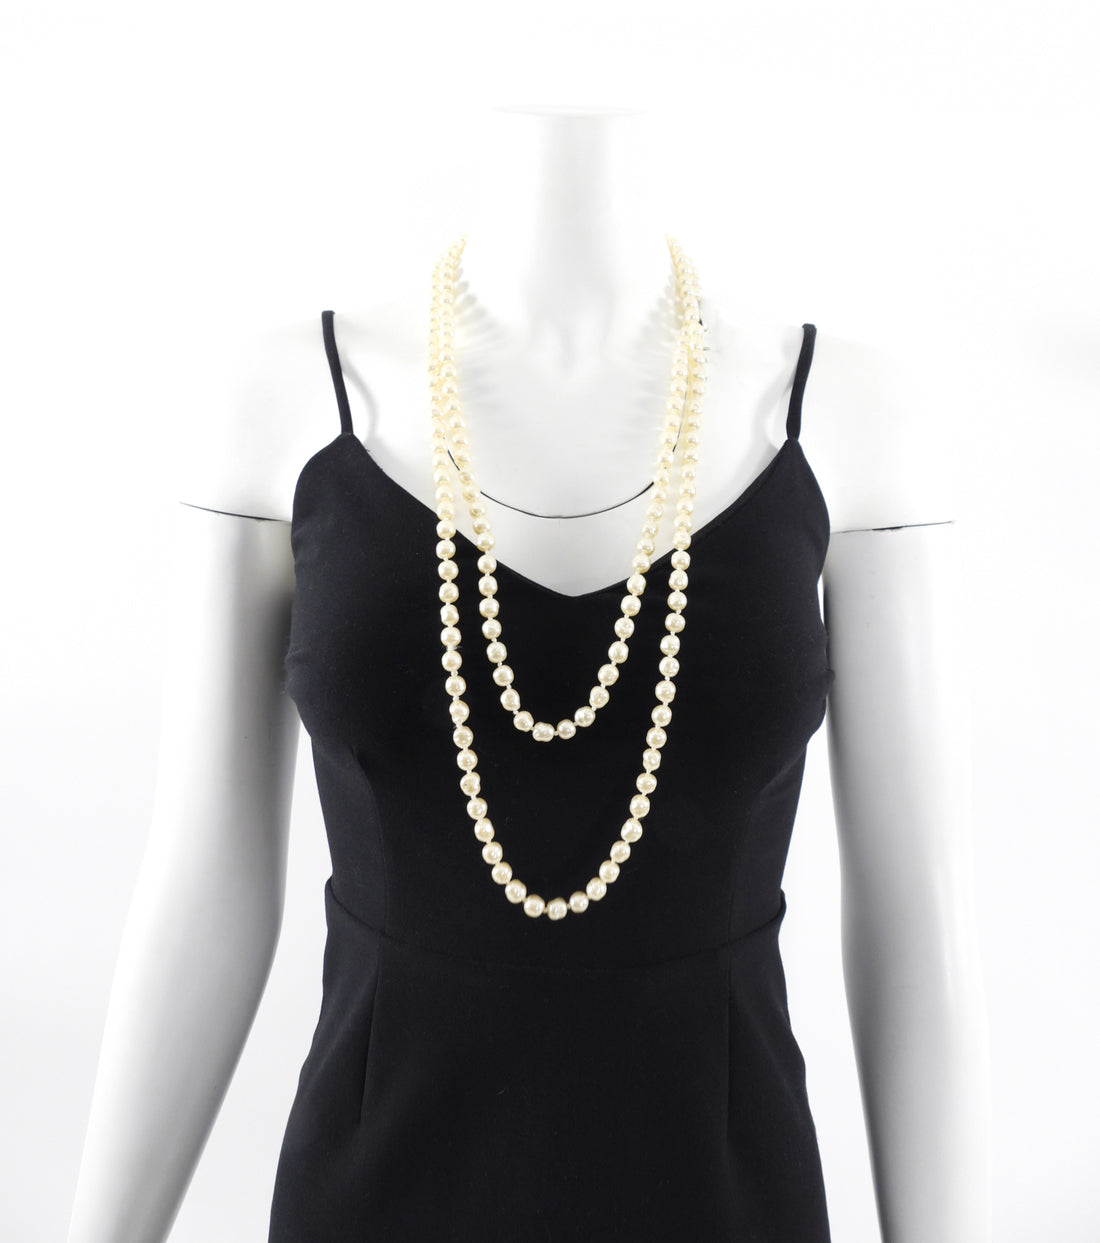 Chanel Vintage 1981 Faux Pearl Long Single Strand Necklace